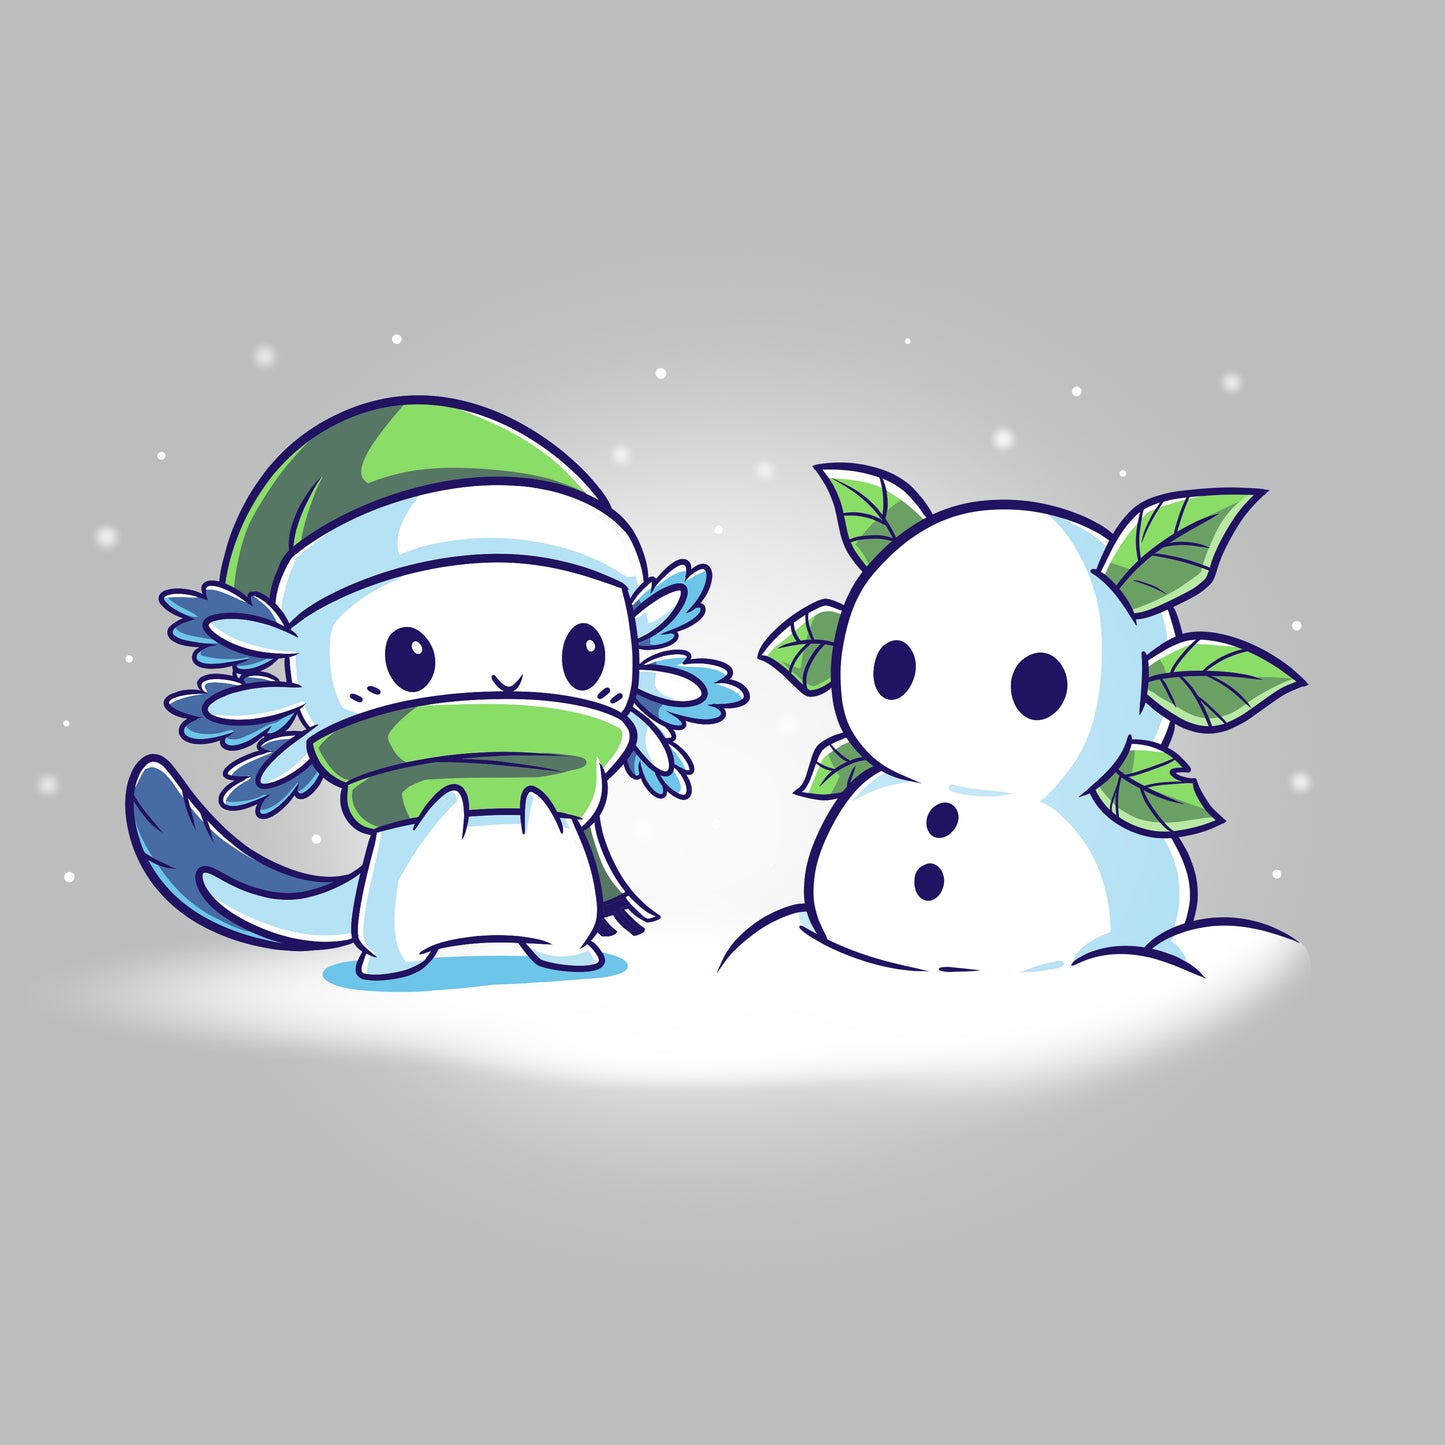 A TeeTurtle Frosty Friend wearing a T-shirt stands next to a snowman and Santa Claus.